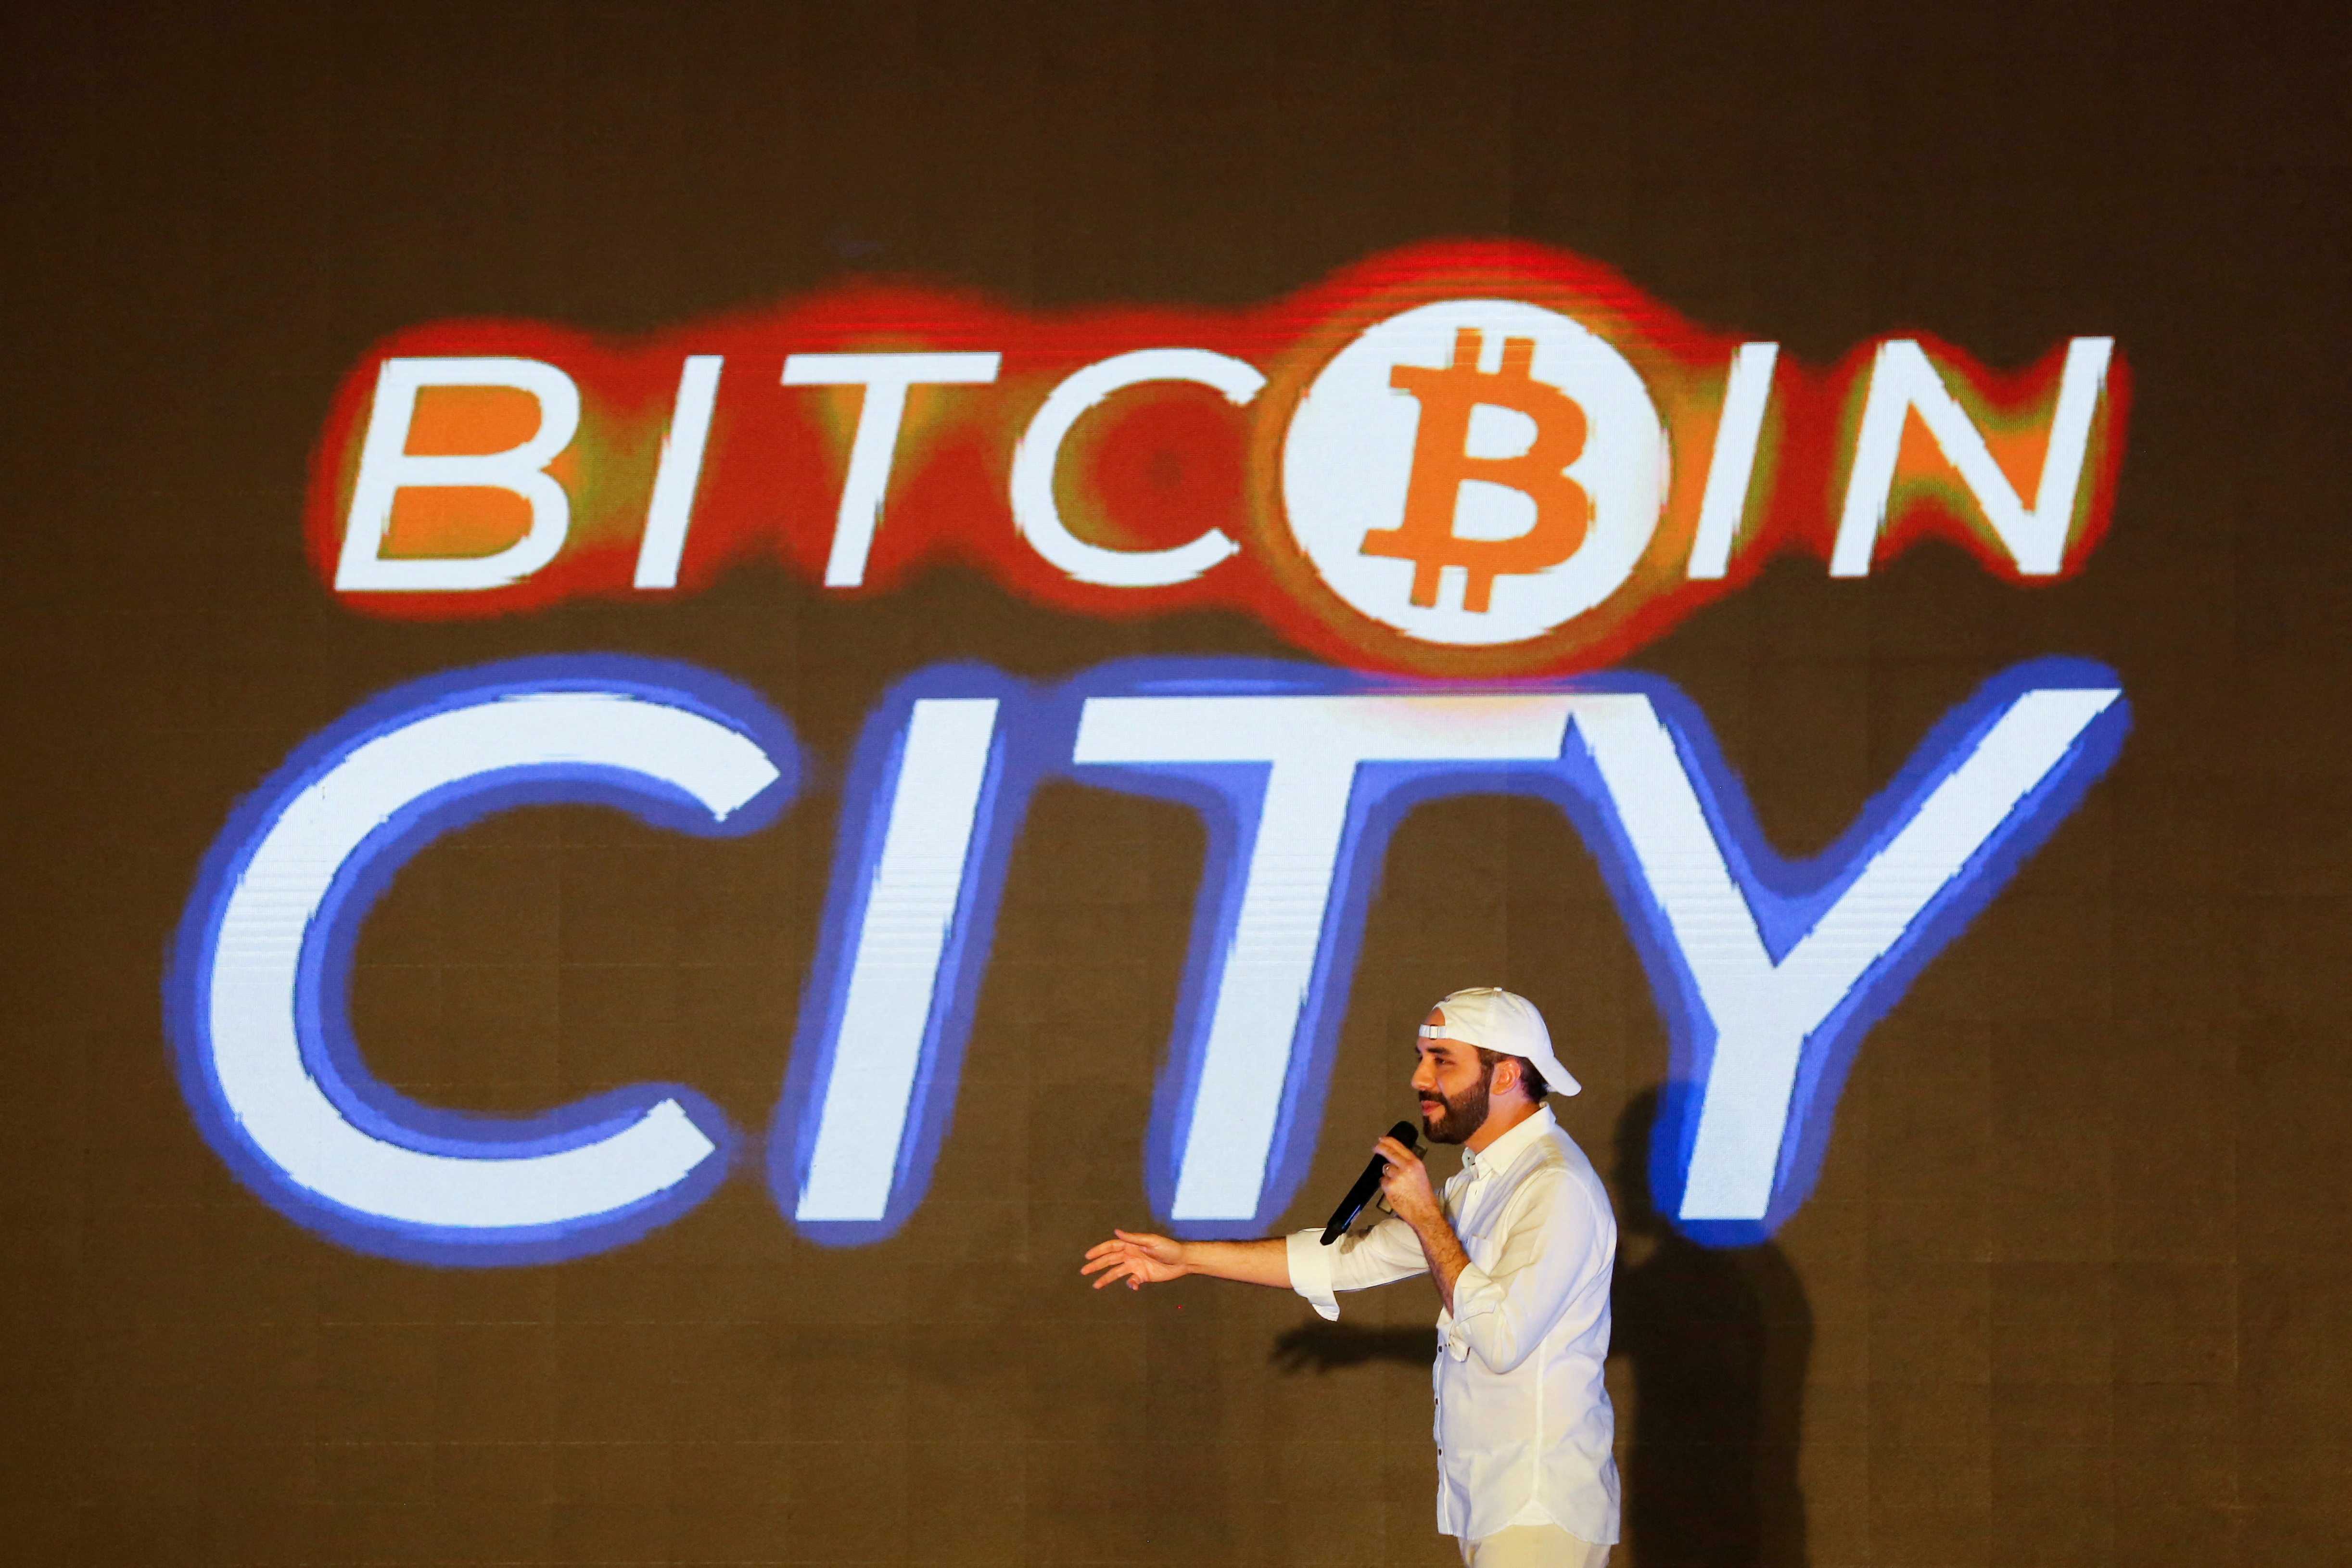 FILE PHOTO: El Salvador’s president Nayib Bukele speaks at the closing party of the “Bitcoin Week” where he announced the plan to build the first “Bitcoin City” in the world, in Teotepeque, El Salvador November 20, 2021. REUTERS/Jose Cabezas/File Photo